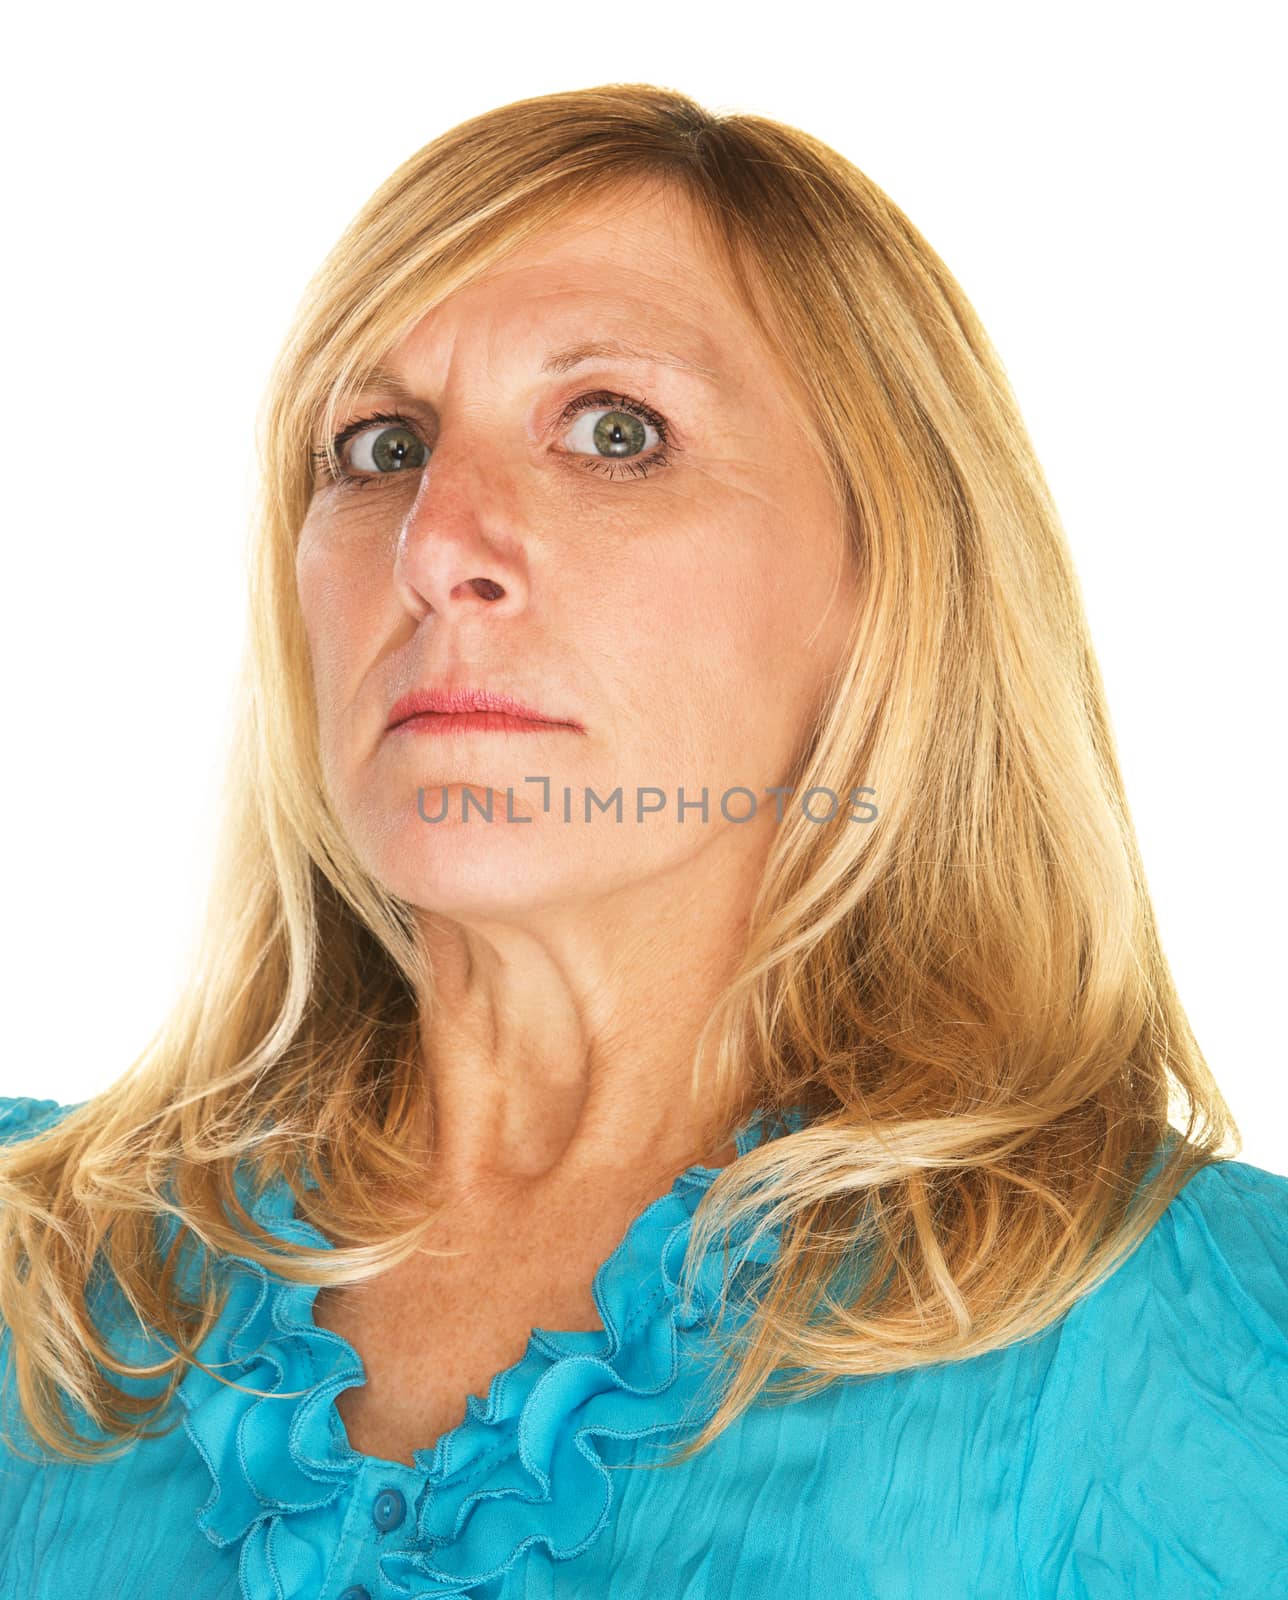 Strict blond Caucasian female looking down her nose